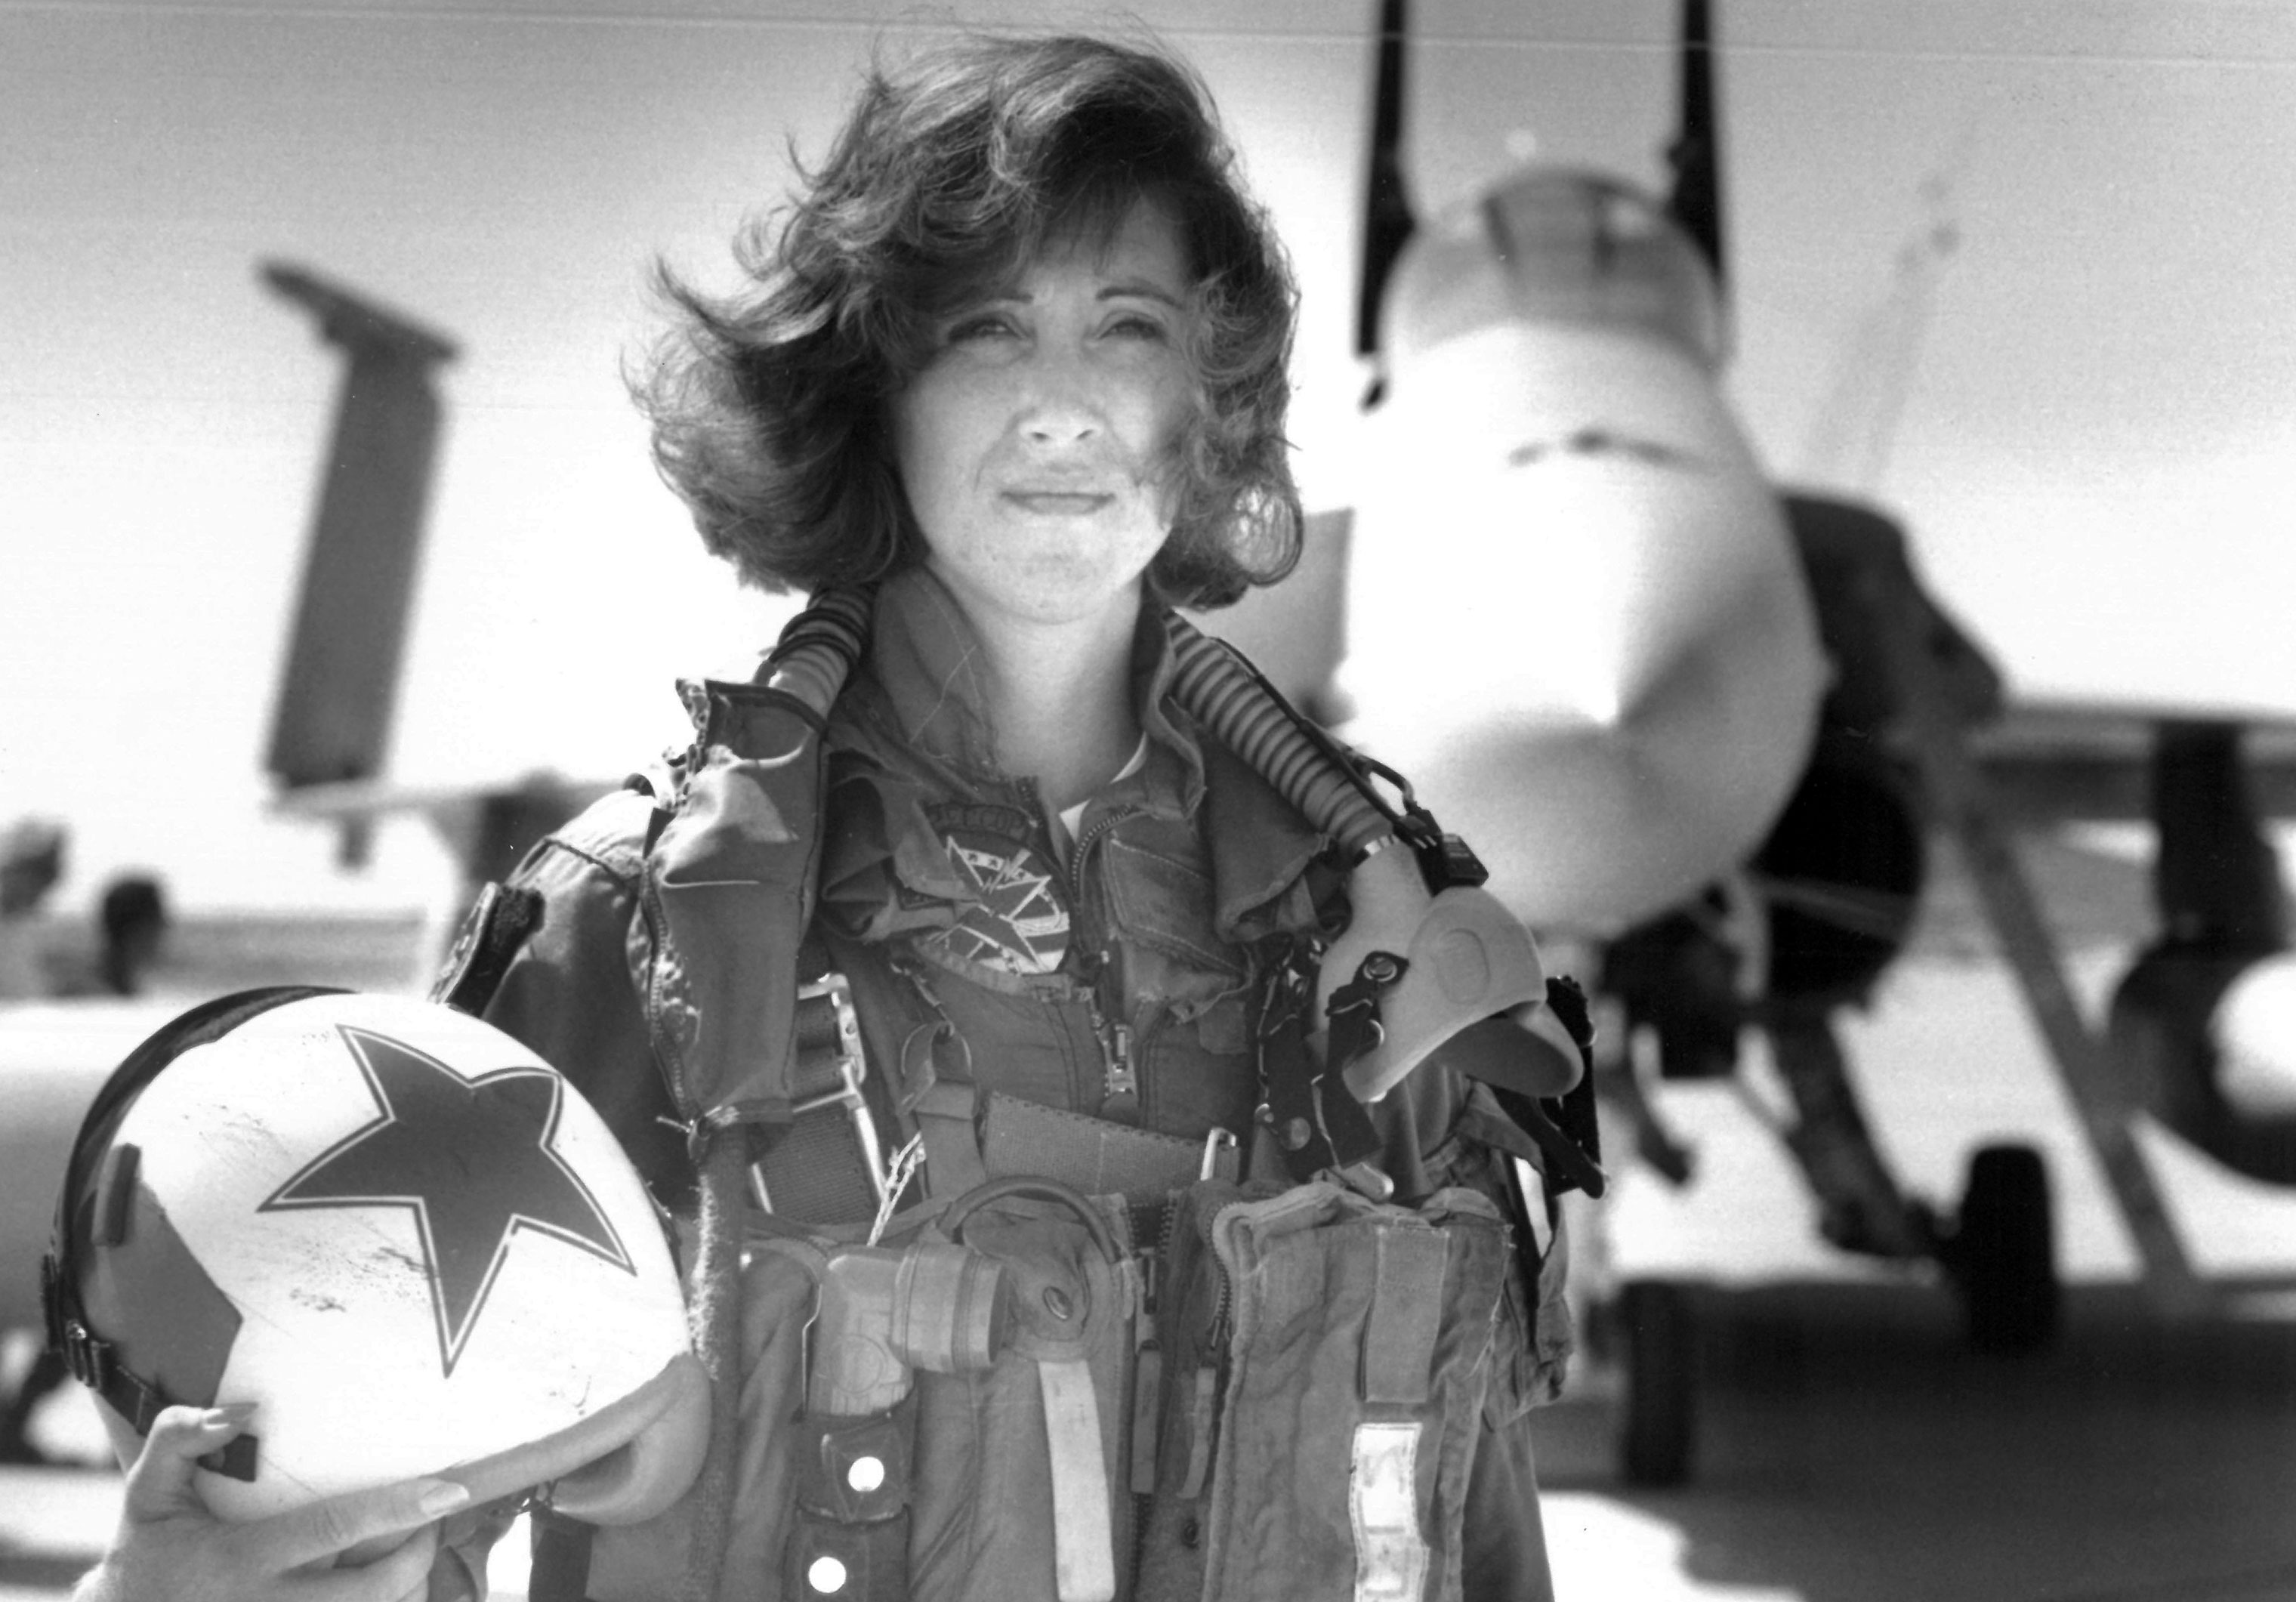 In this image provided by the U.S. Navy, Lt. Tammie Jo Shults, one of the first women to fly Navy tactical aircraft, poses in front of an F/A-18A with Tactical Electronics Warfare Squadron (VAQ) 34 in 1992. After leaving active duty in early 1993, Shults served in the Navy Reserve until 2001. Shults was the pilot of the Southwest plane that made an emergency landing on April 17, 2018, after an engine explosion. (Thomas P. Milne—AP)